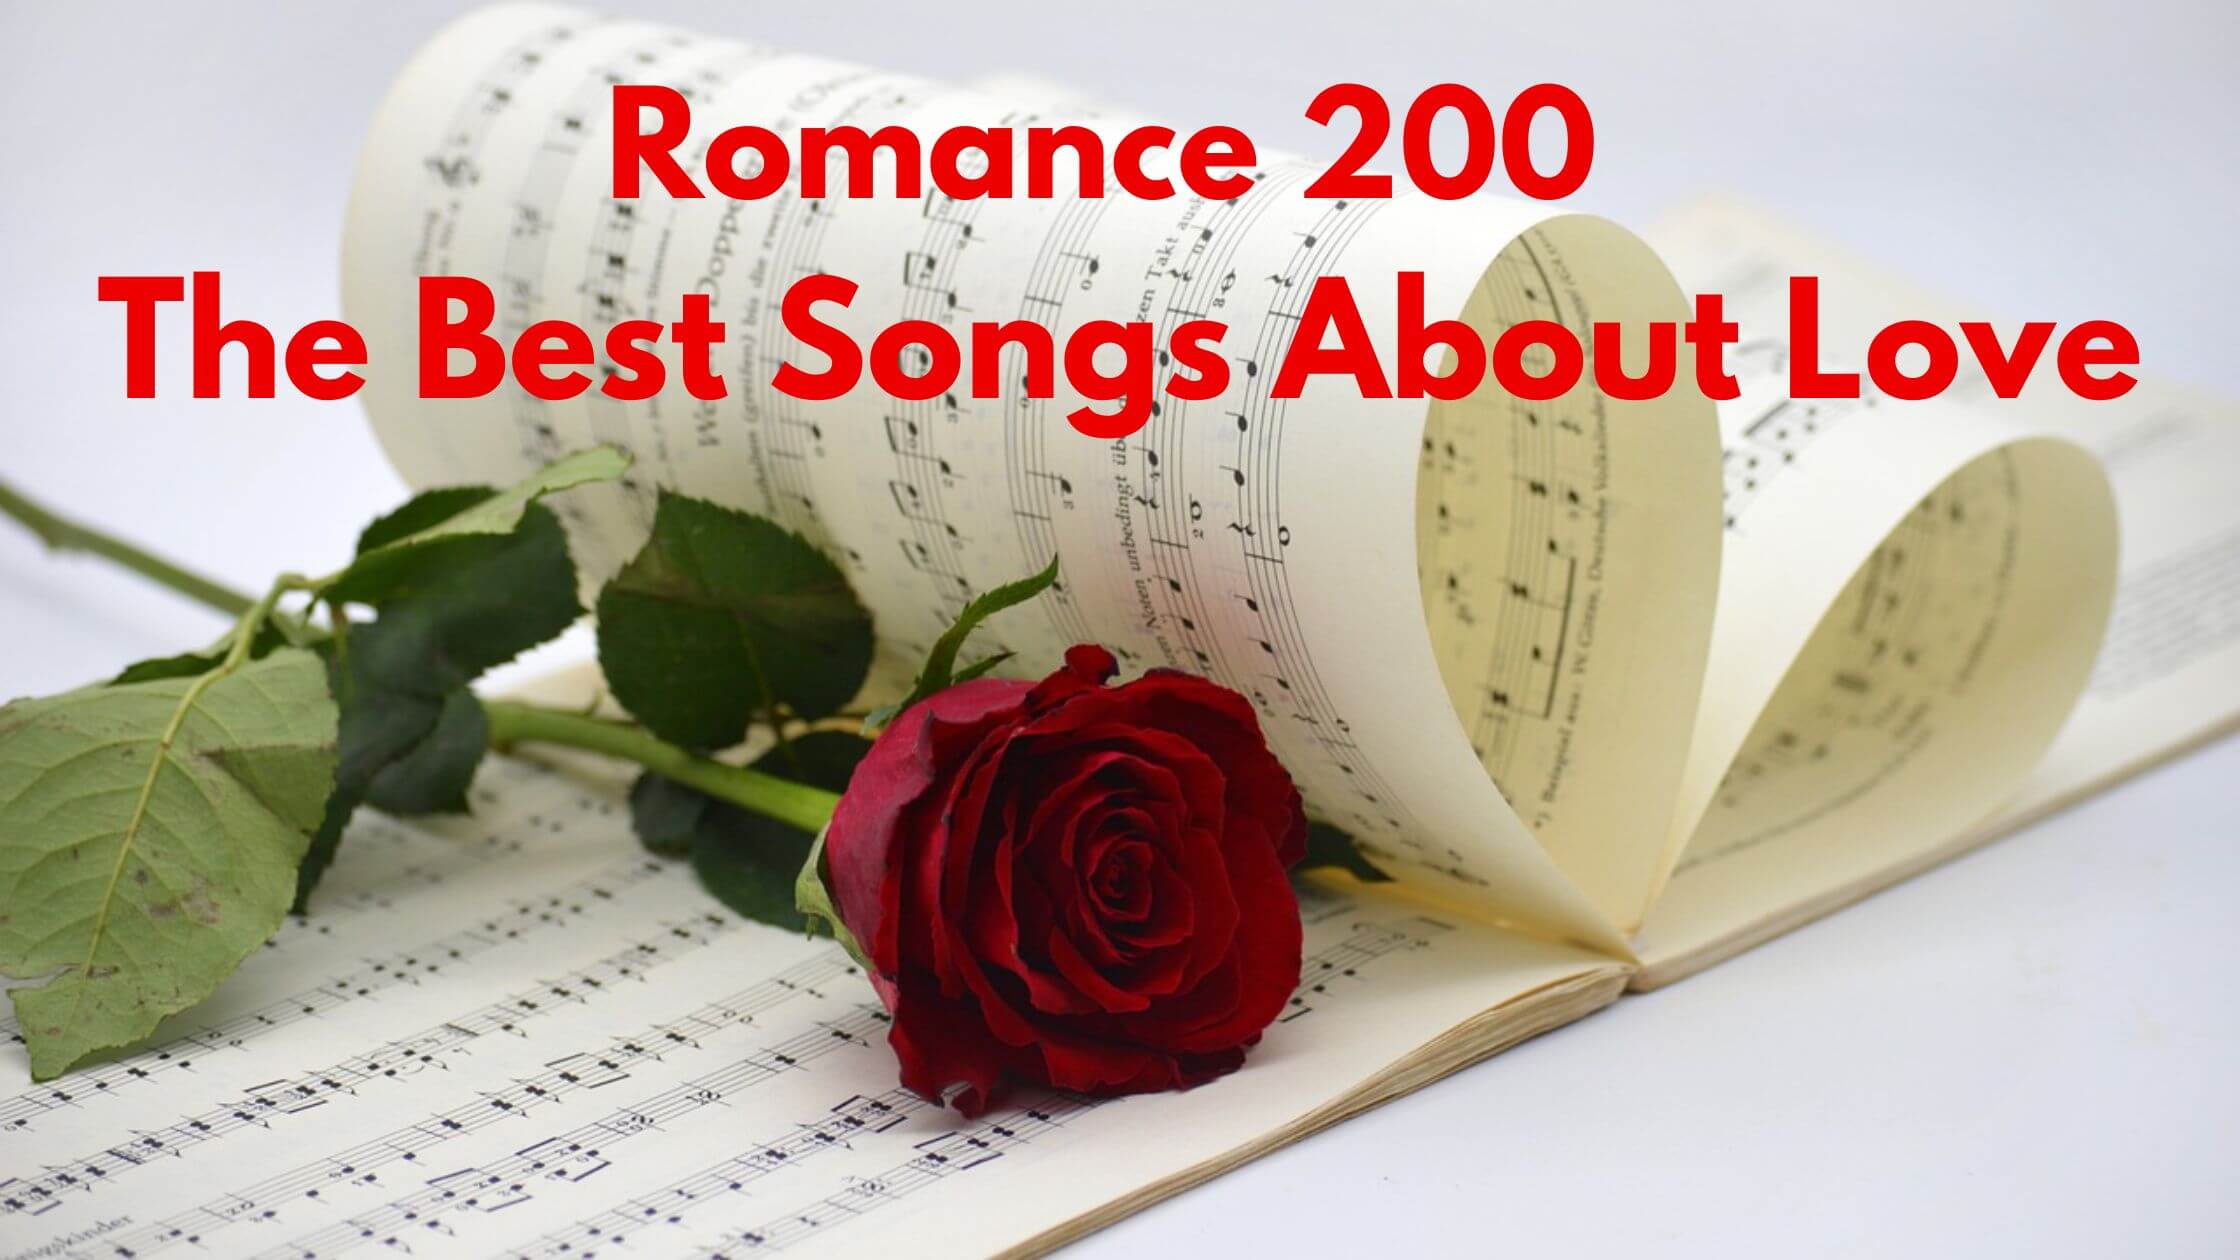 Romance 200: The Best Songs About Love.